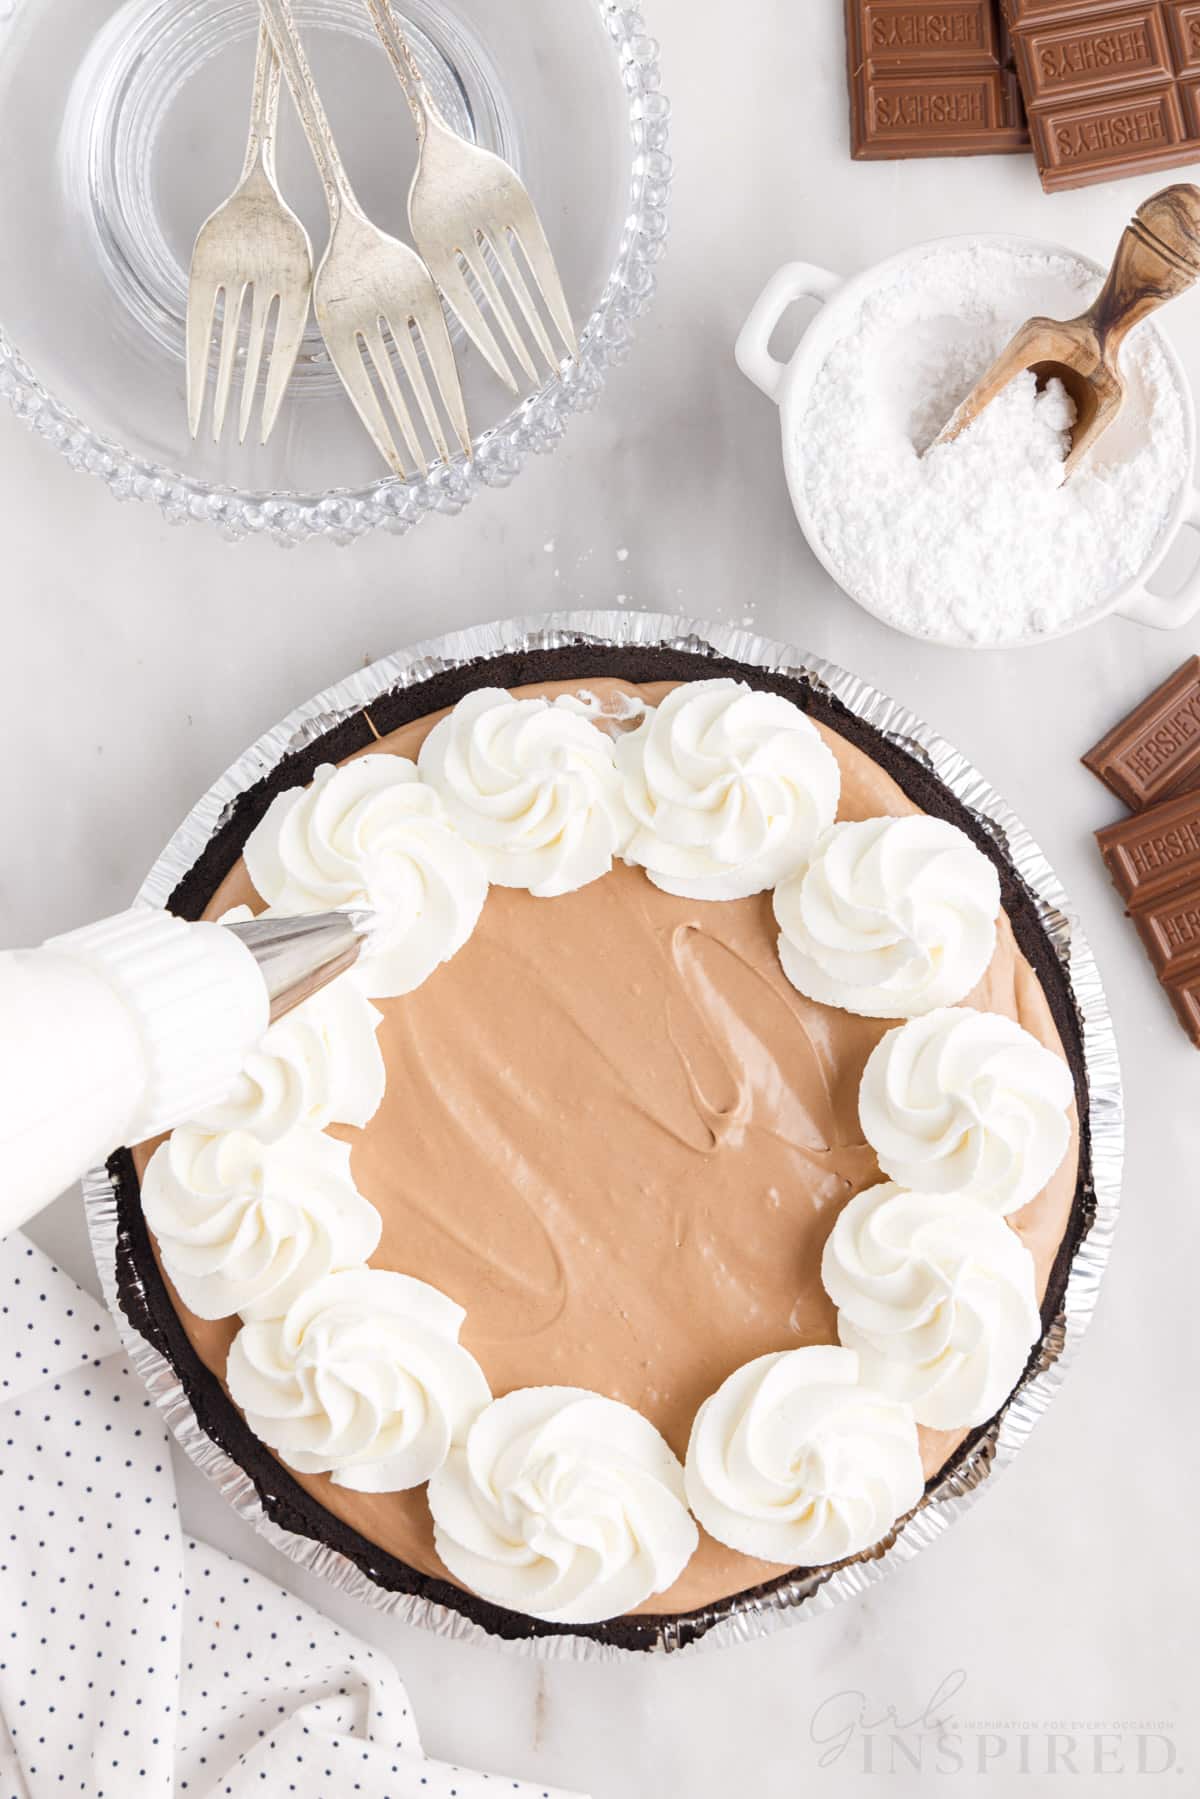 Cool whip piped around edges of pie.